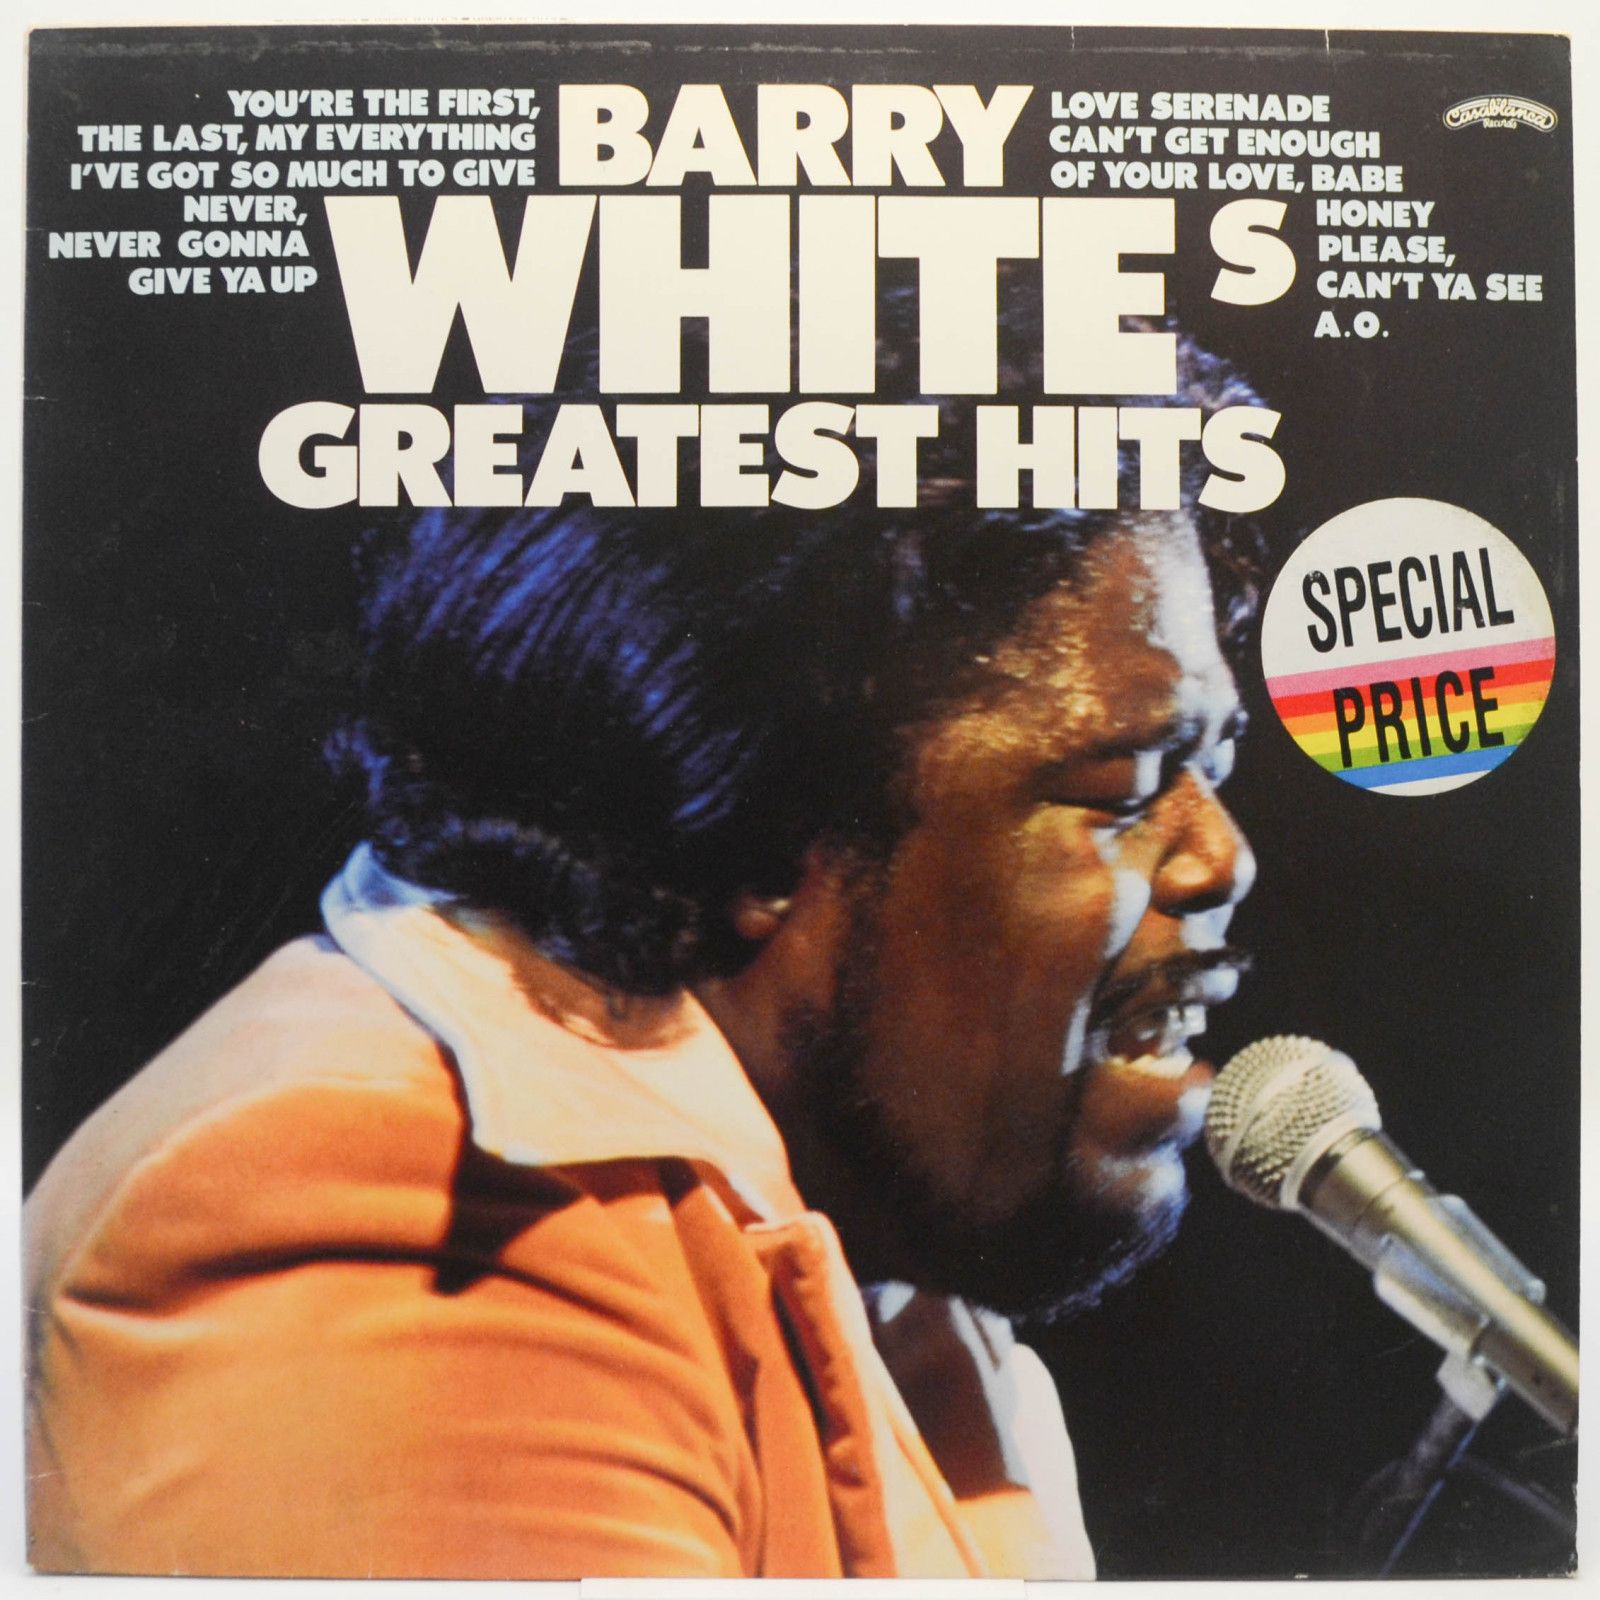 Barry White — Barry White's Greatest Hits, 1975